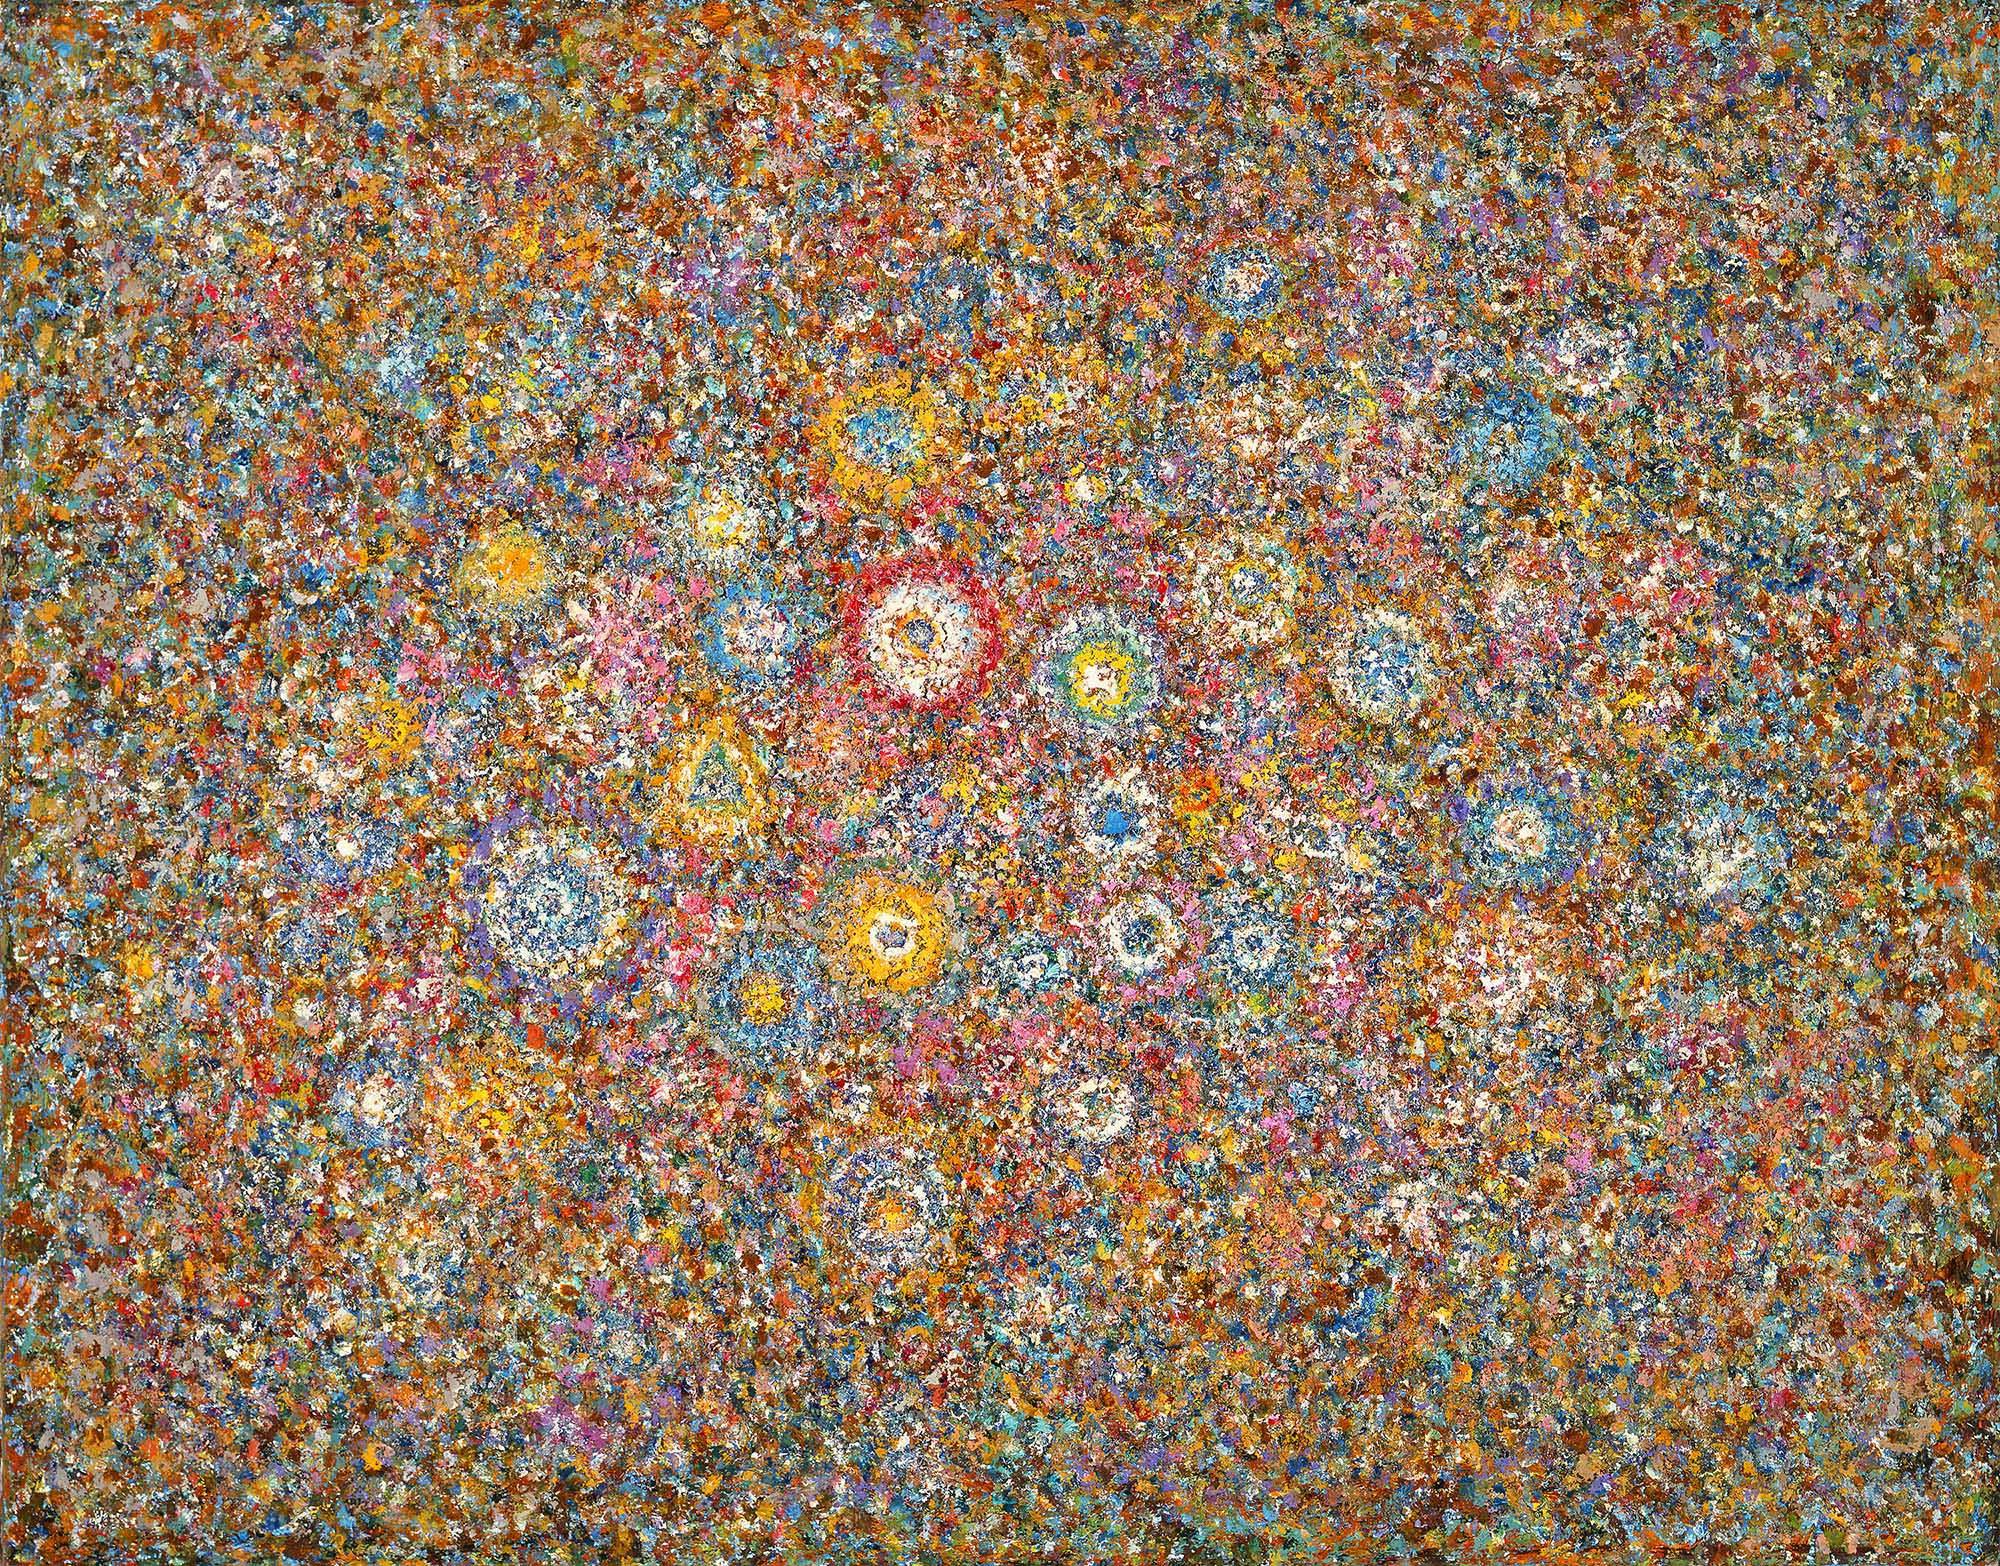 Untitled
1961
Oil on masonite
22 x 28 in. (55.9 x 71.1 cm)
Milwaukee Art Museum, Wis., Gift of William P. and Beth H. Chapman
 – The Richard Pousette-Dart Foundation